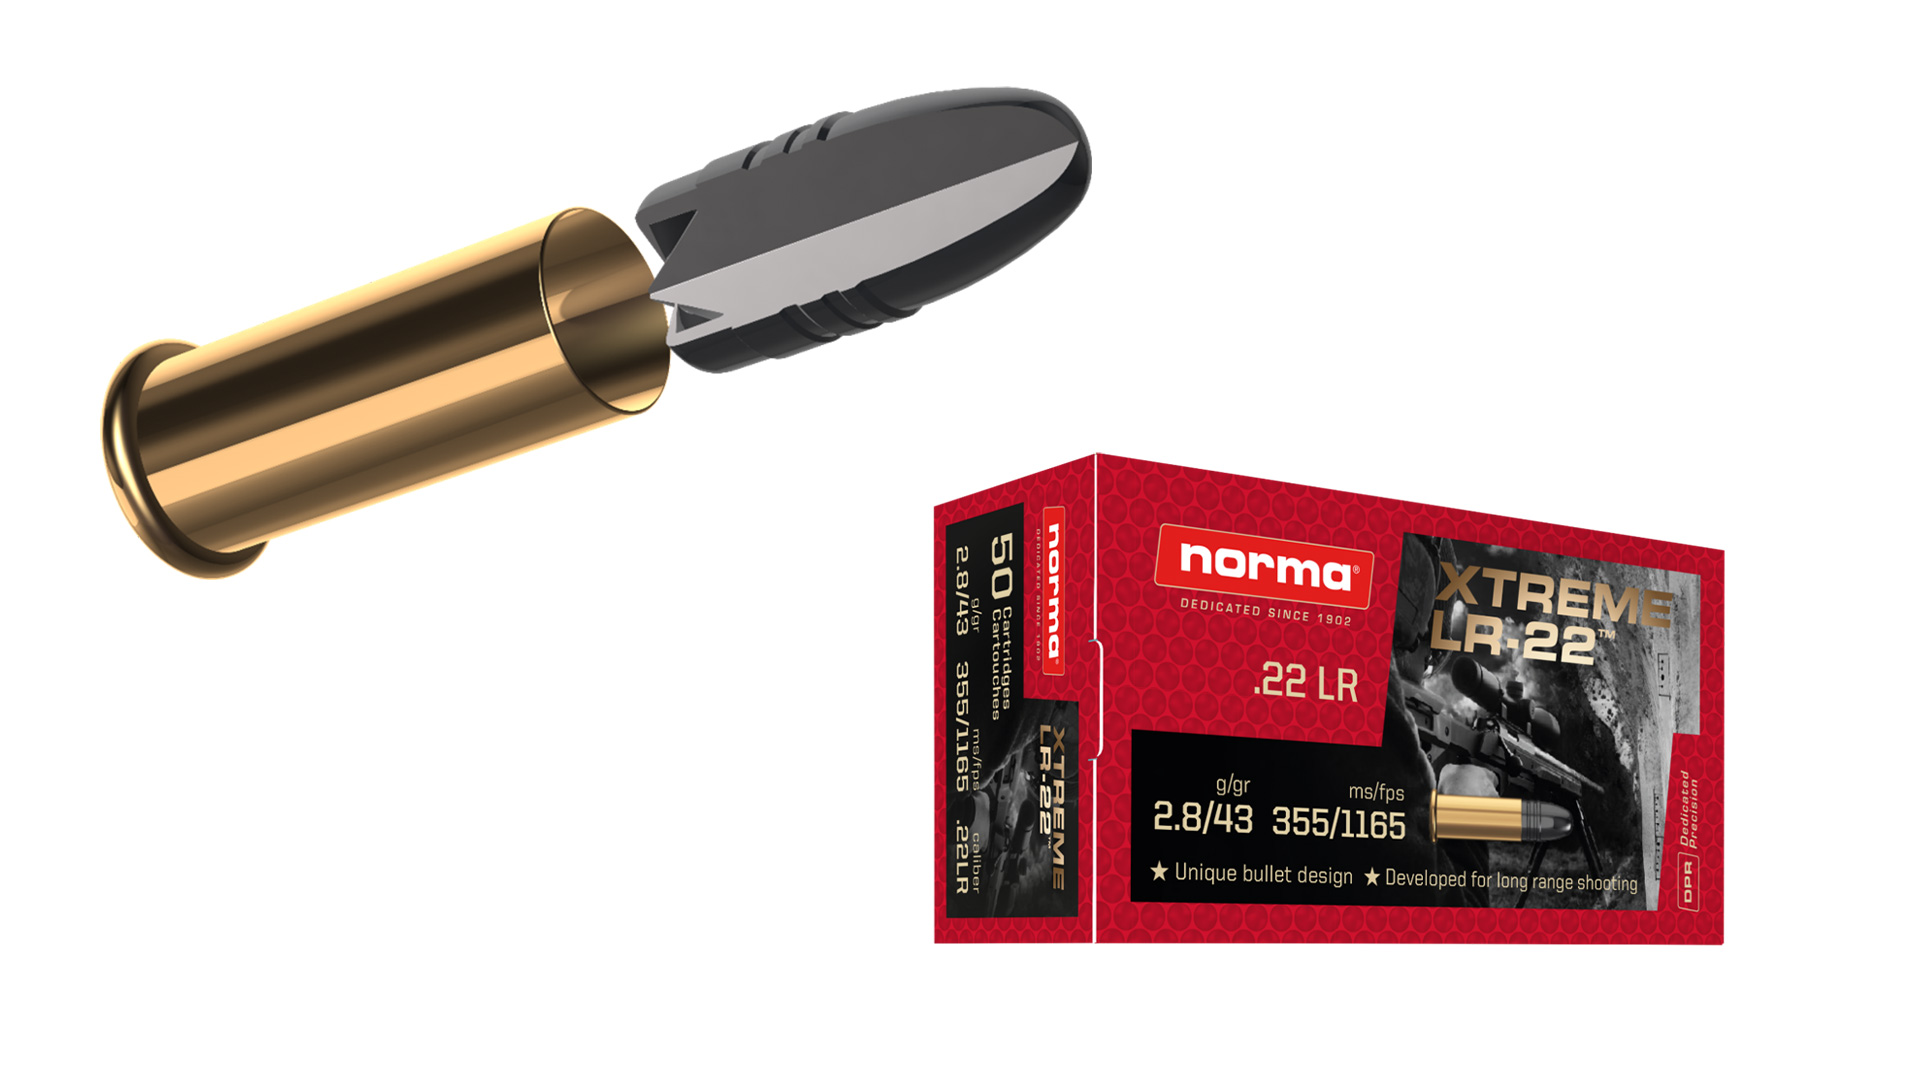 Norma XTREME LR-22